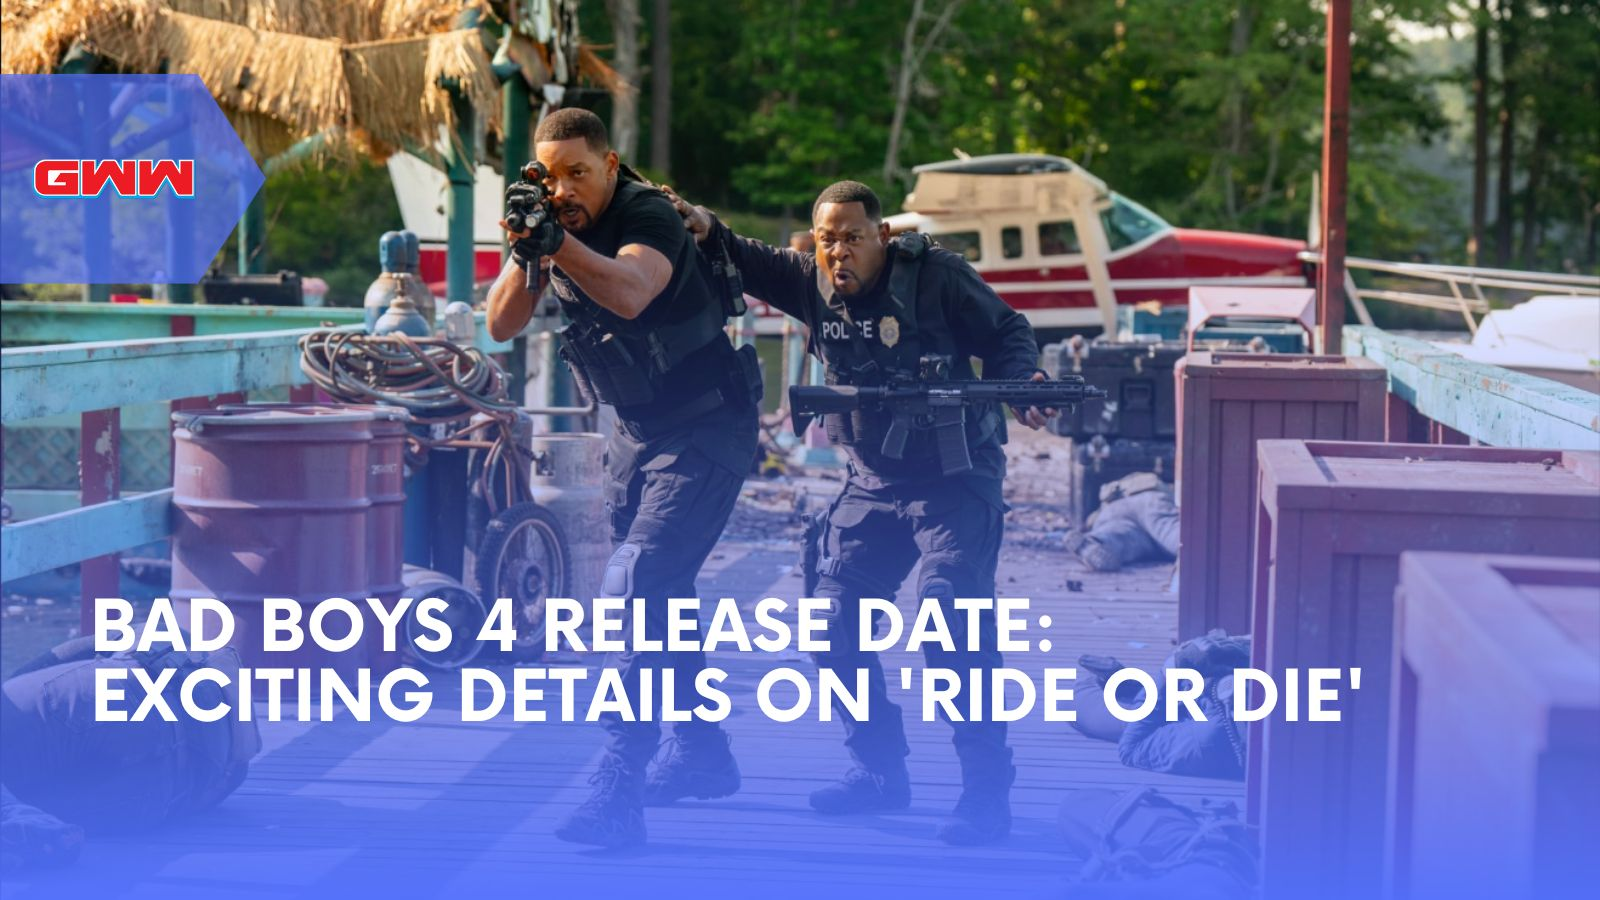 Bad Boys 4 Release Date: Exciting Details on 'Ride or Die'